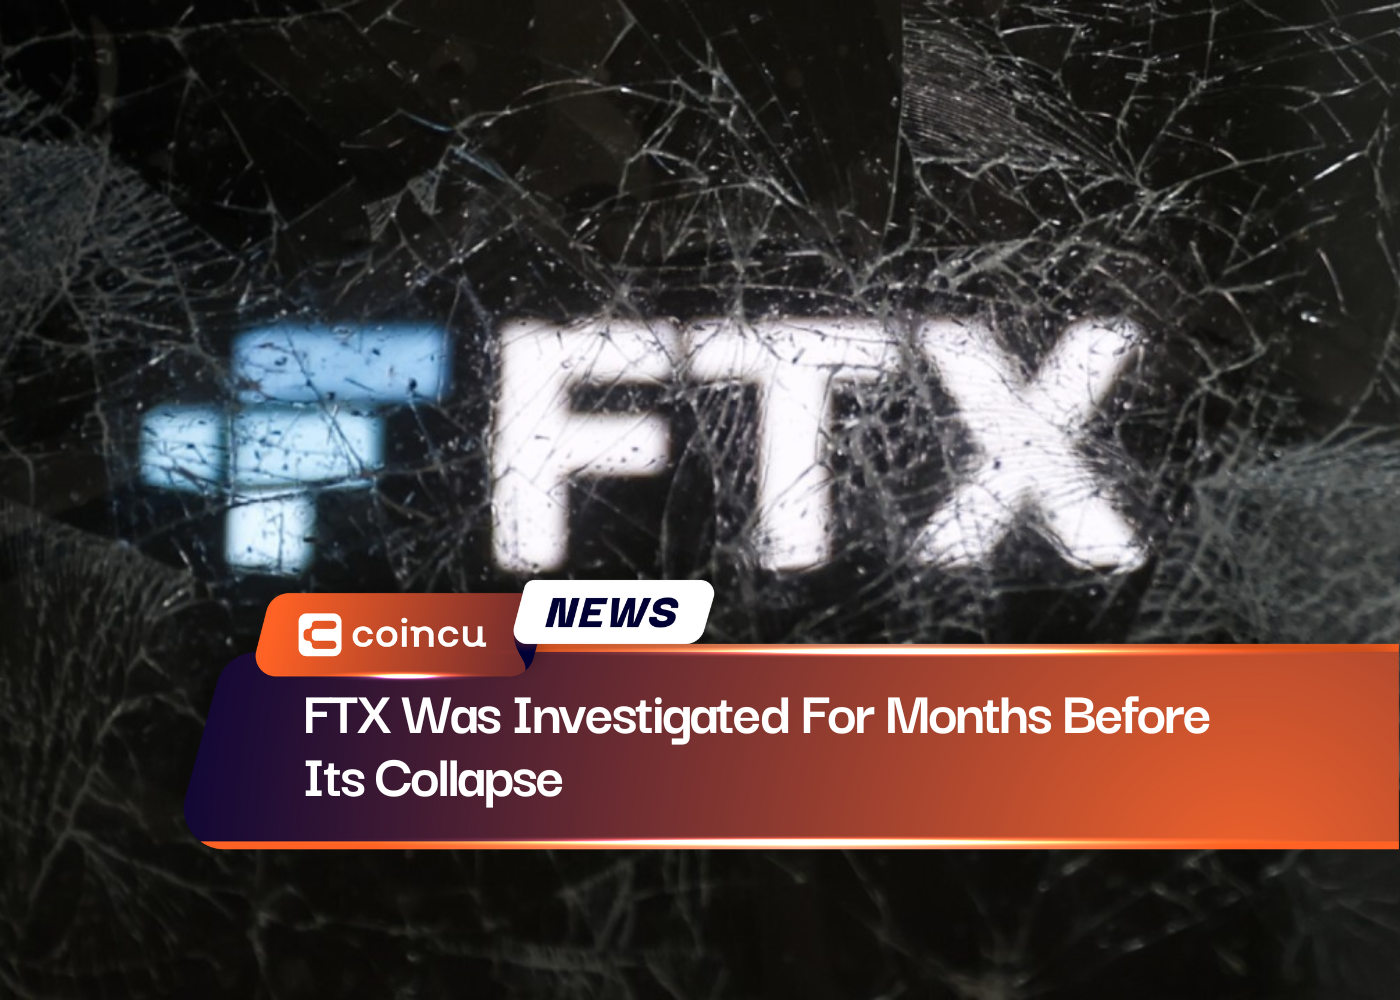 FTX Was Investigated For Months Before Its Collapse